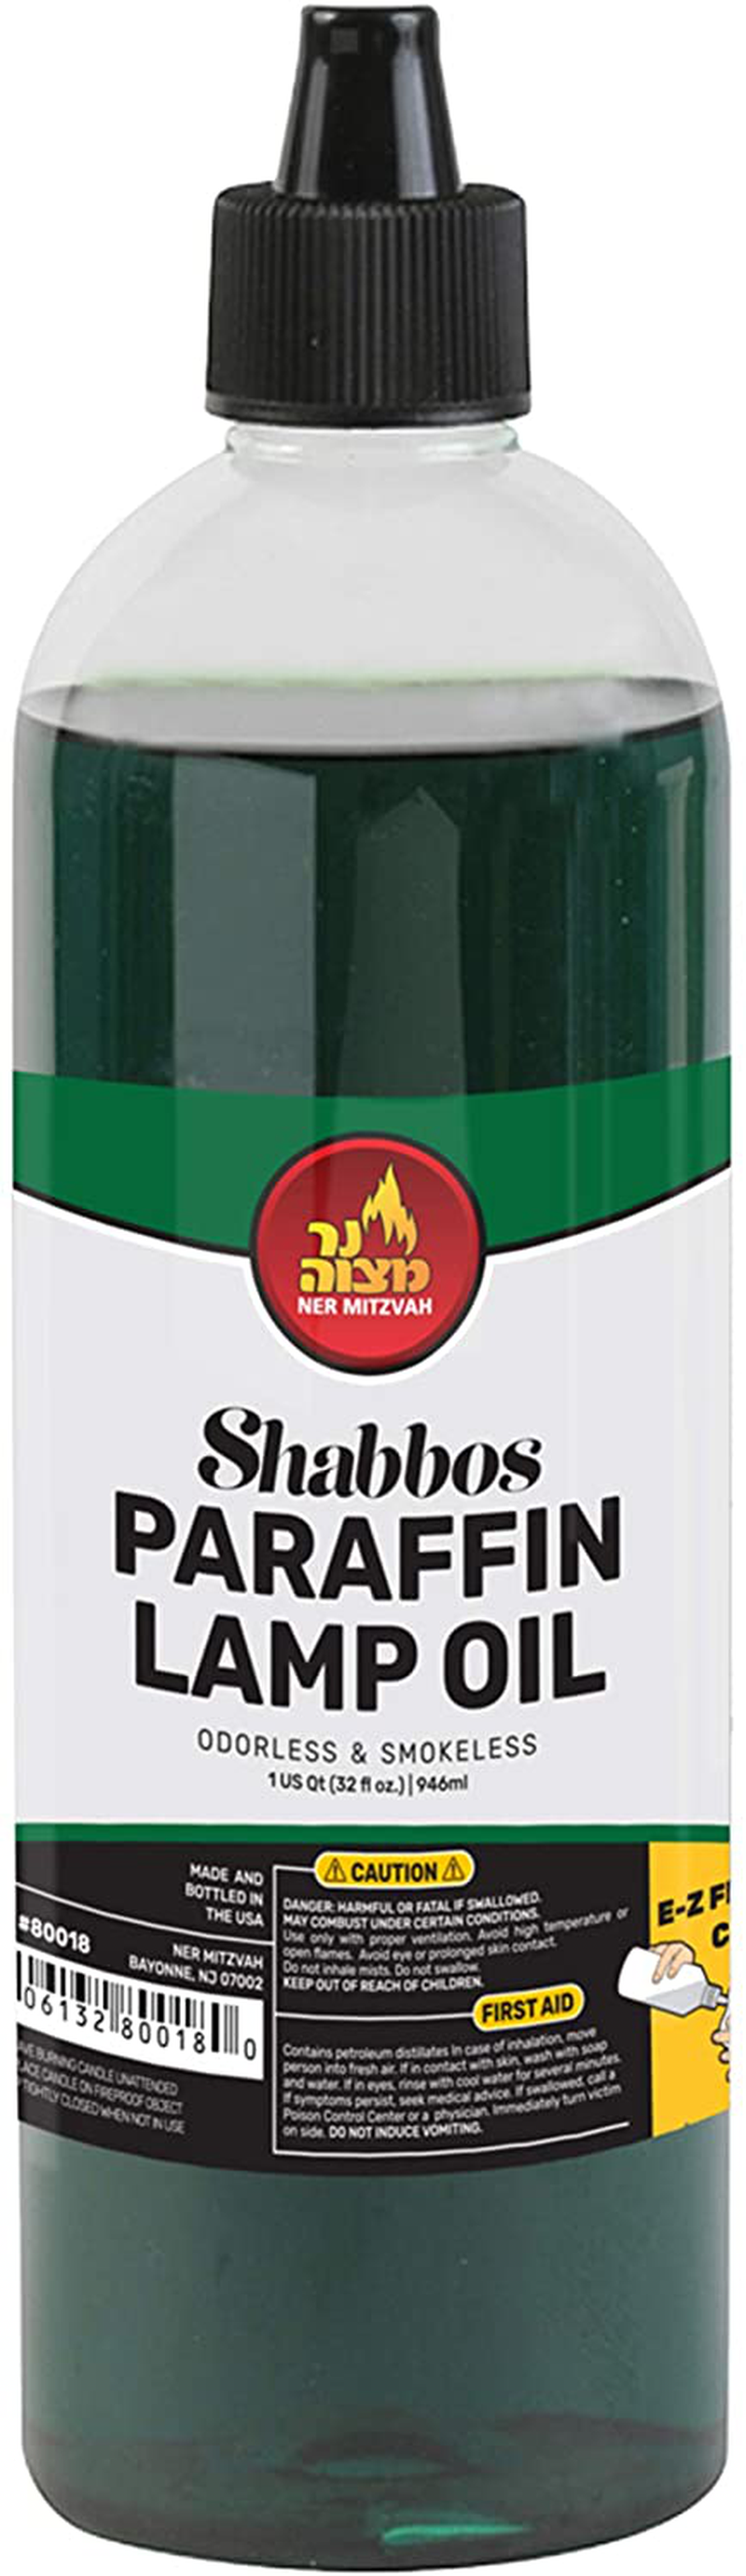 Paraffin Lamp Oil - Green Smokeless, Odorless, Clean Burning Fuel for Indoor and Outdoor Use with E-Z Fill Cap and Pouring Spout - 32oz - by Ner Mitzvah Home & Garden > Lighting Accessories > Oil Lamp Fuel Ner Mitzvah Default Title  